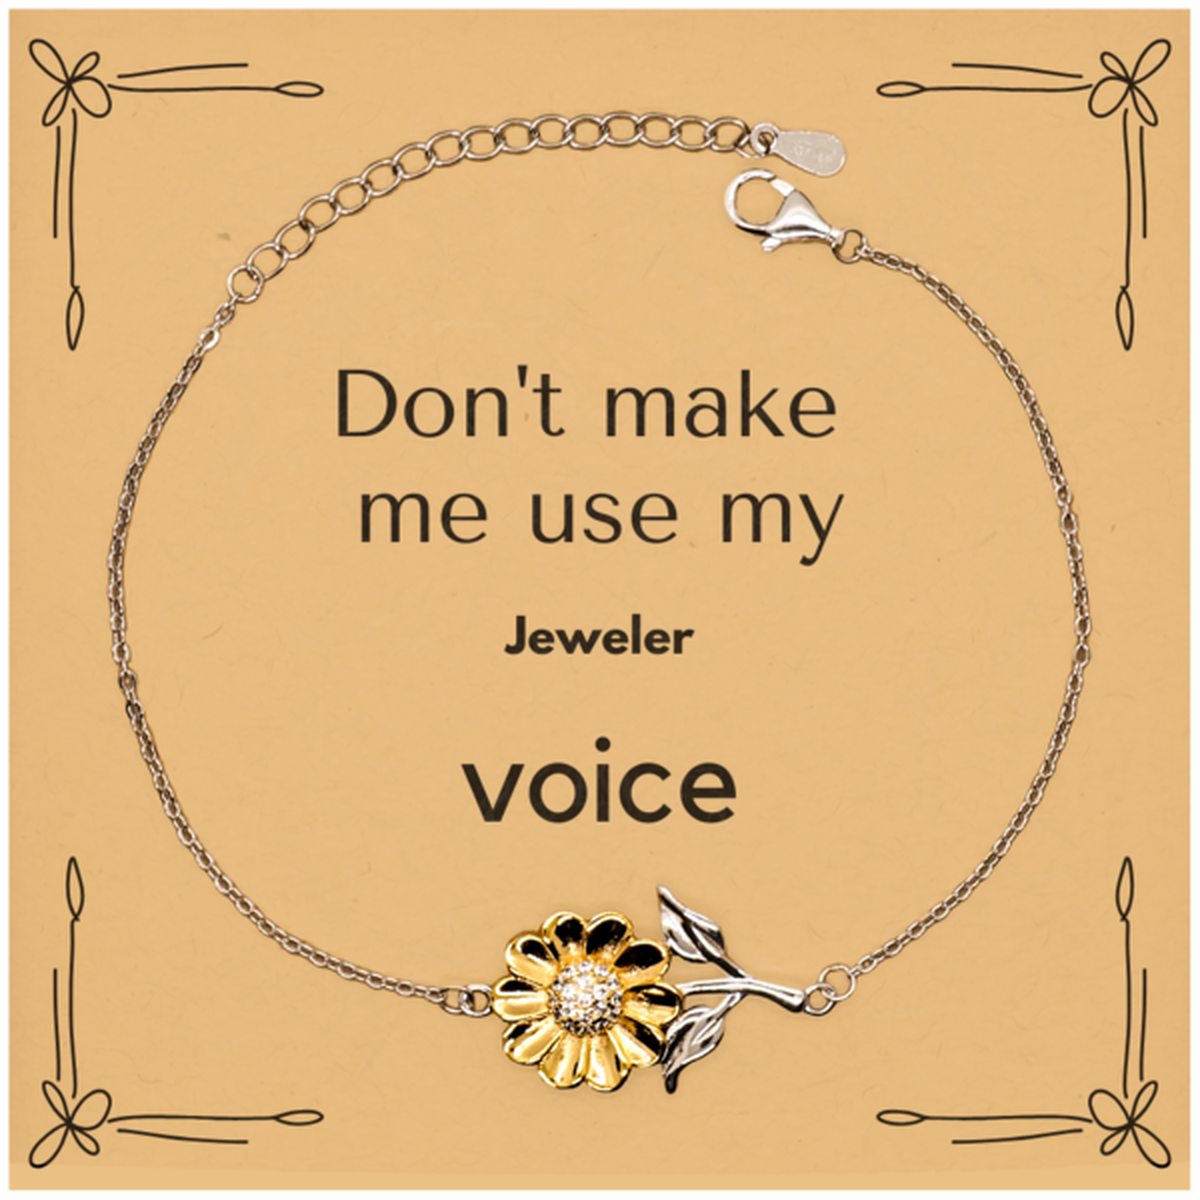 Don't make me use my Jeweler voice, Sarcasm Jeweler Card Gifts, Christmas Jeweler Sunflower Bracelet Birthday Unique Gifts For Jeweler Coworkers, Men, Women, Colleague, Friends